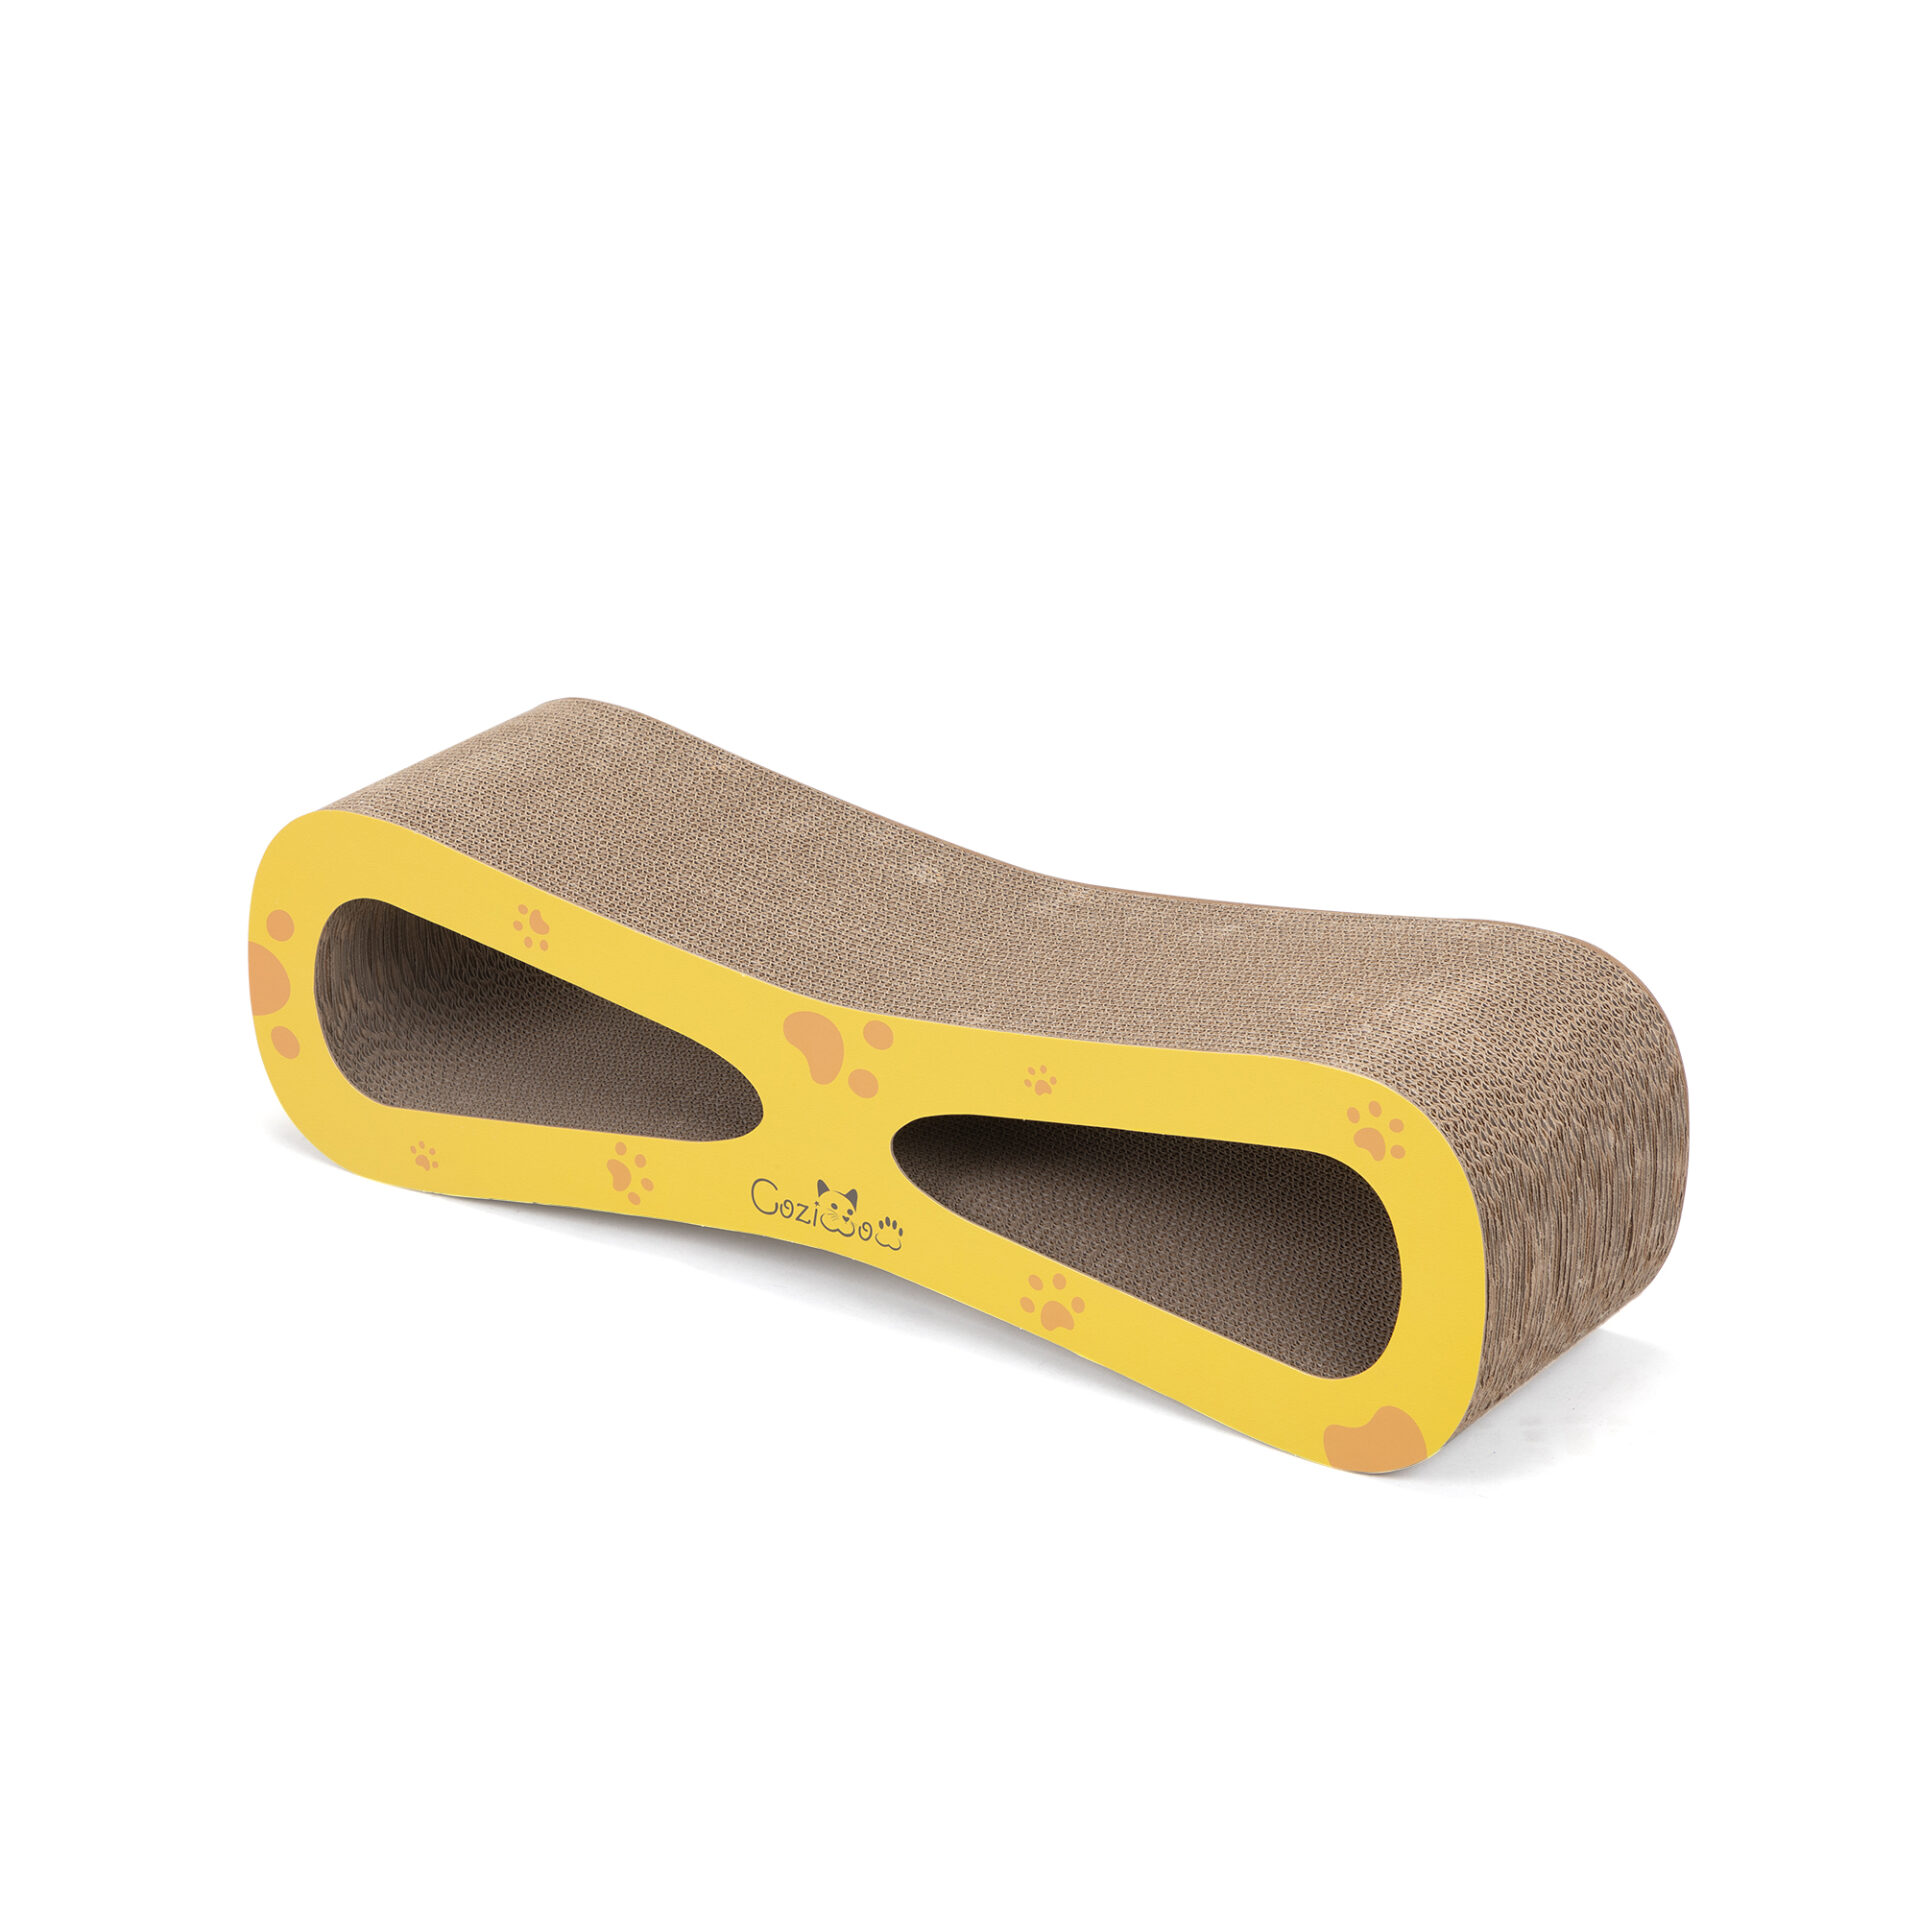 Coziwow 8-Shaped Cat Scratcher Lounge Bed, Cat Scratching Post Cardboard with Catnip, Natural Wood+Yellow CW12Y0557 2